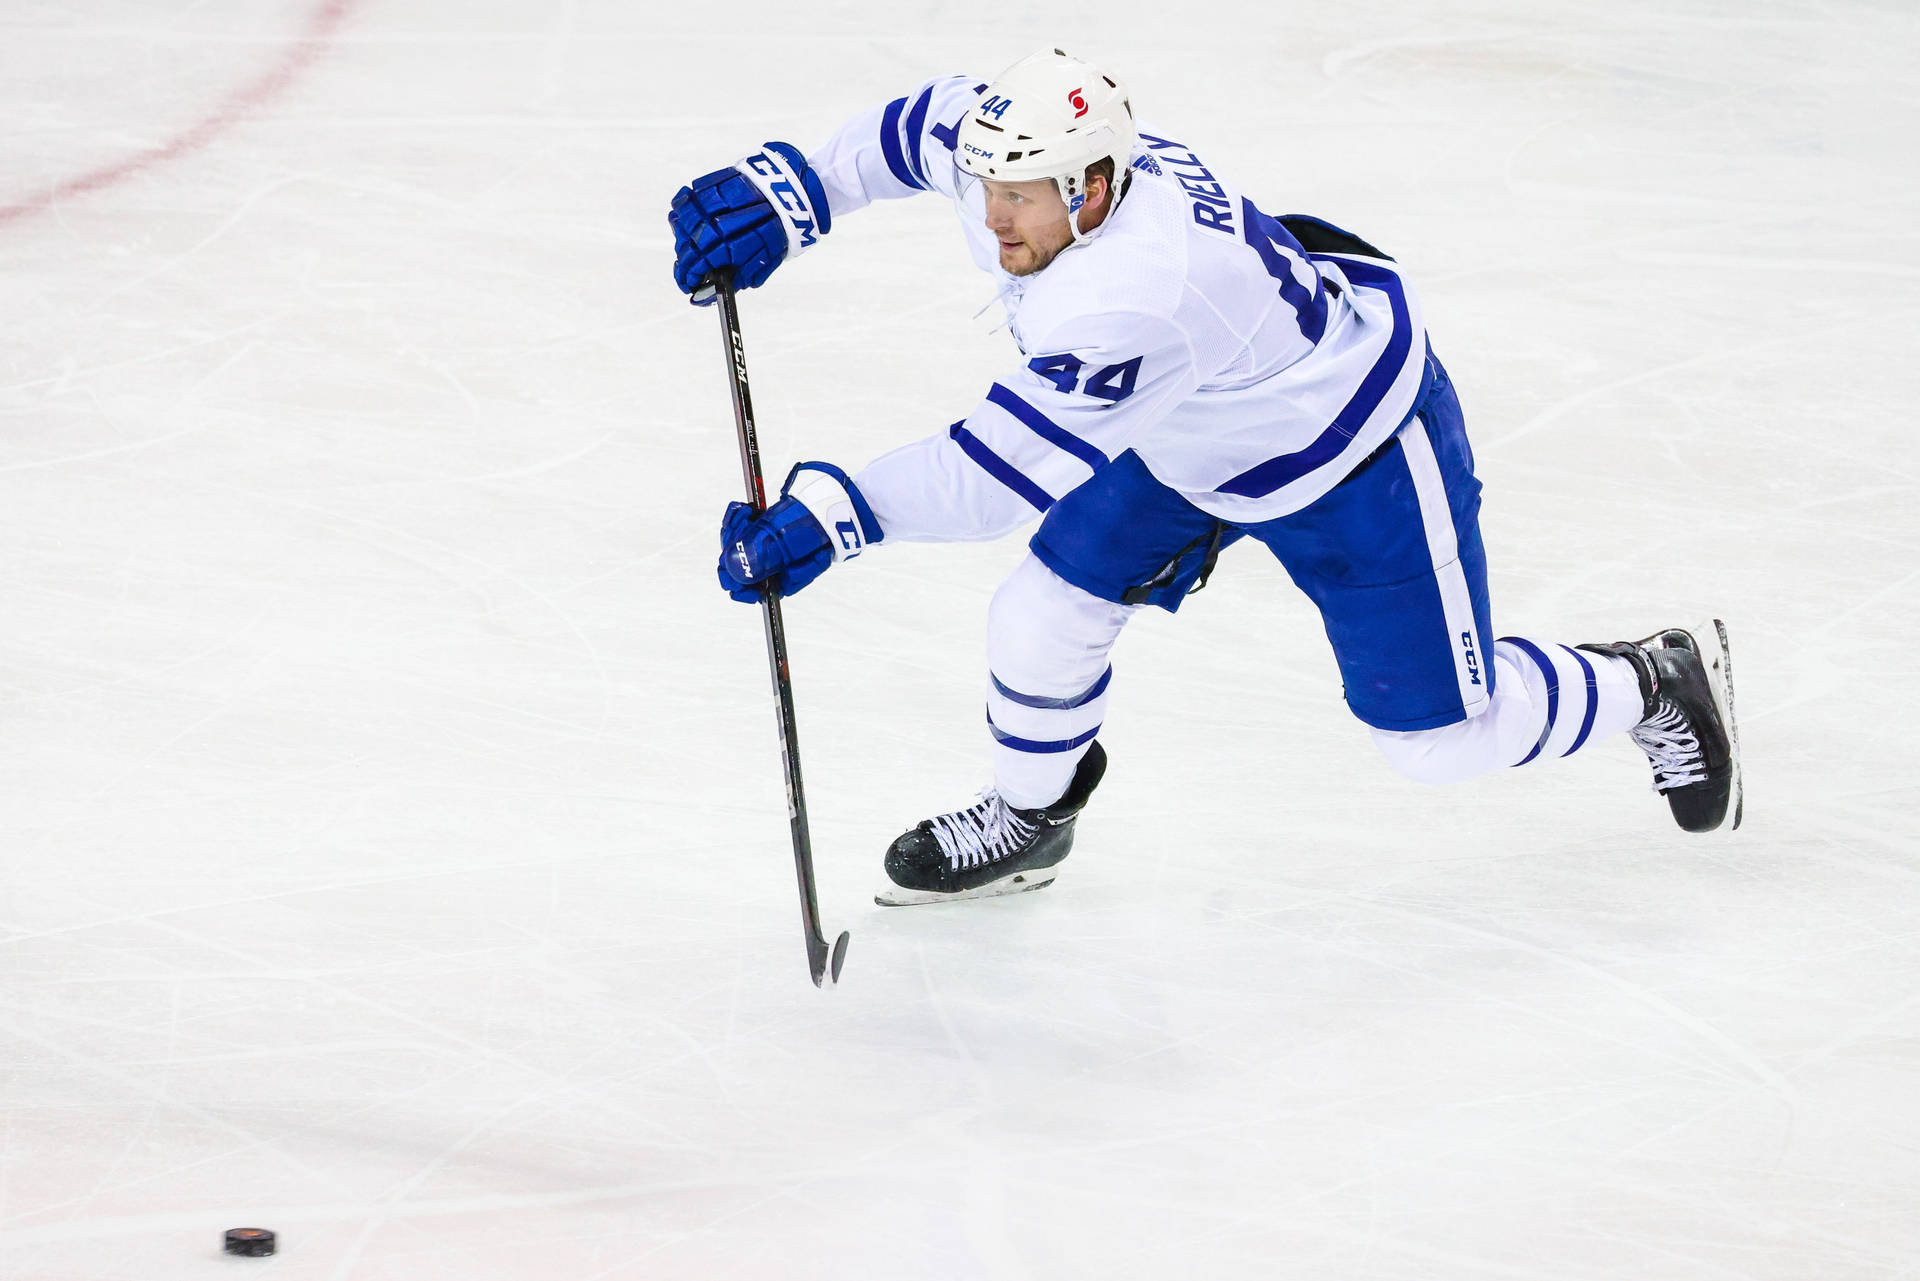 Morgan Rielly, master of the puck, in action on the ice Wallpaper